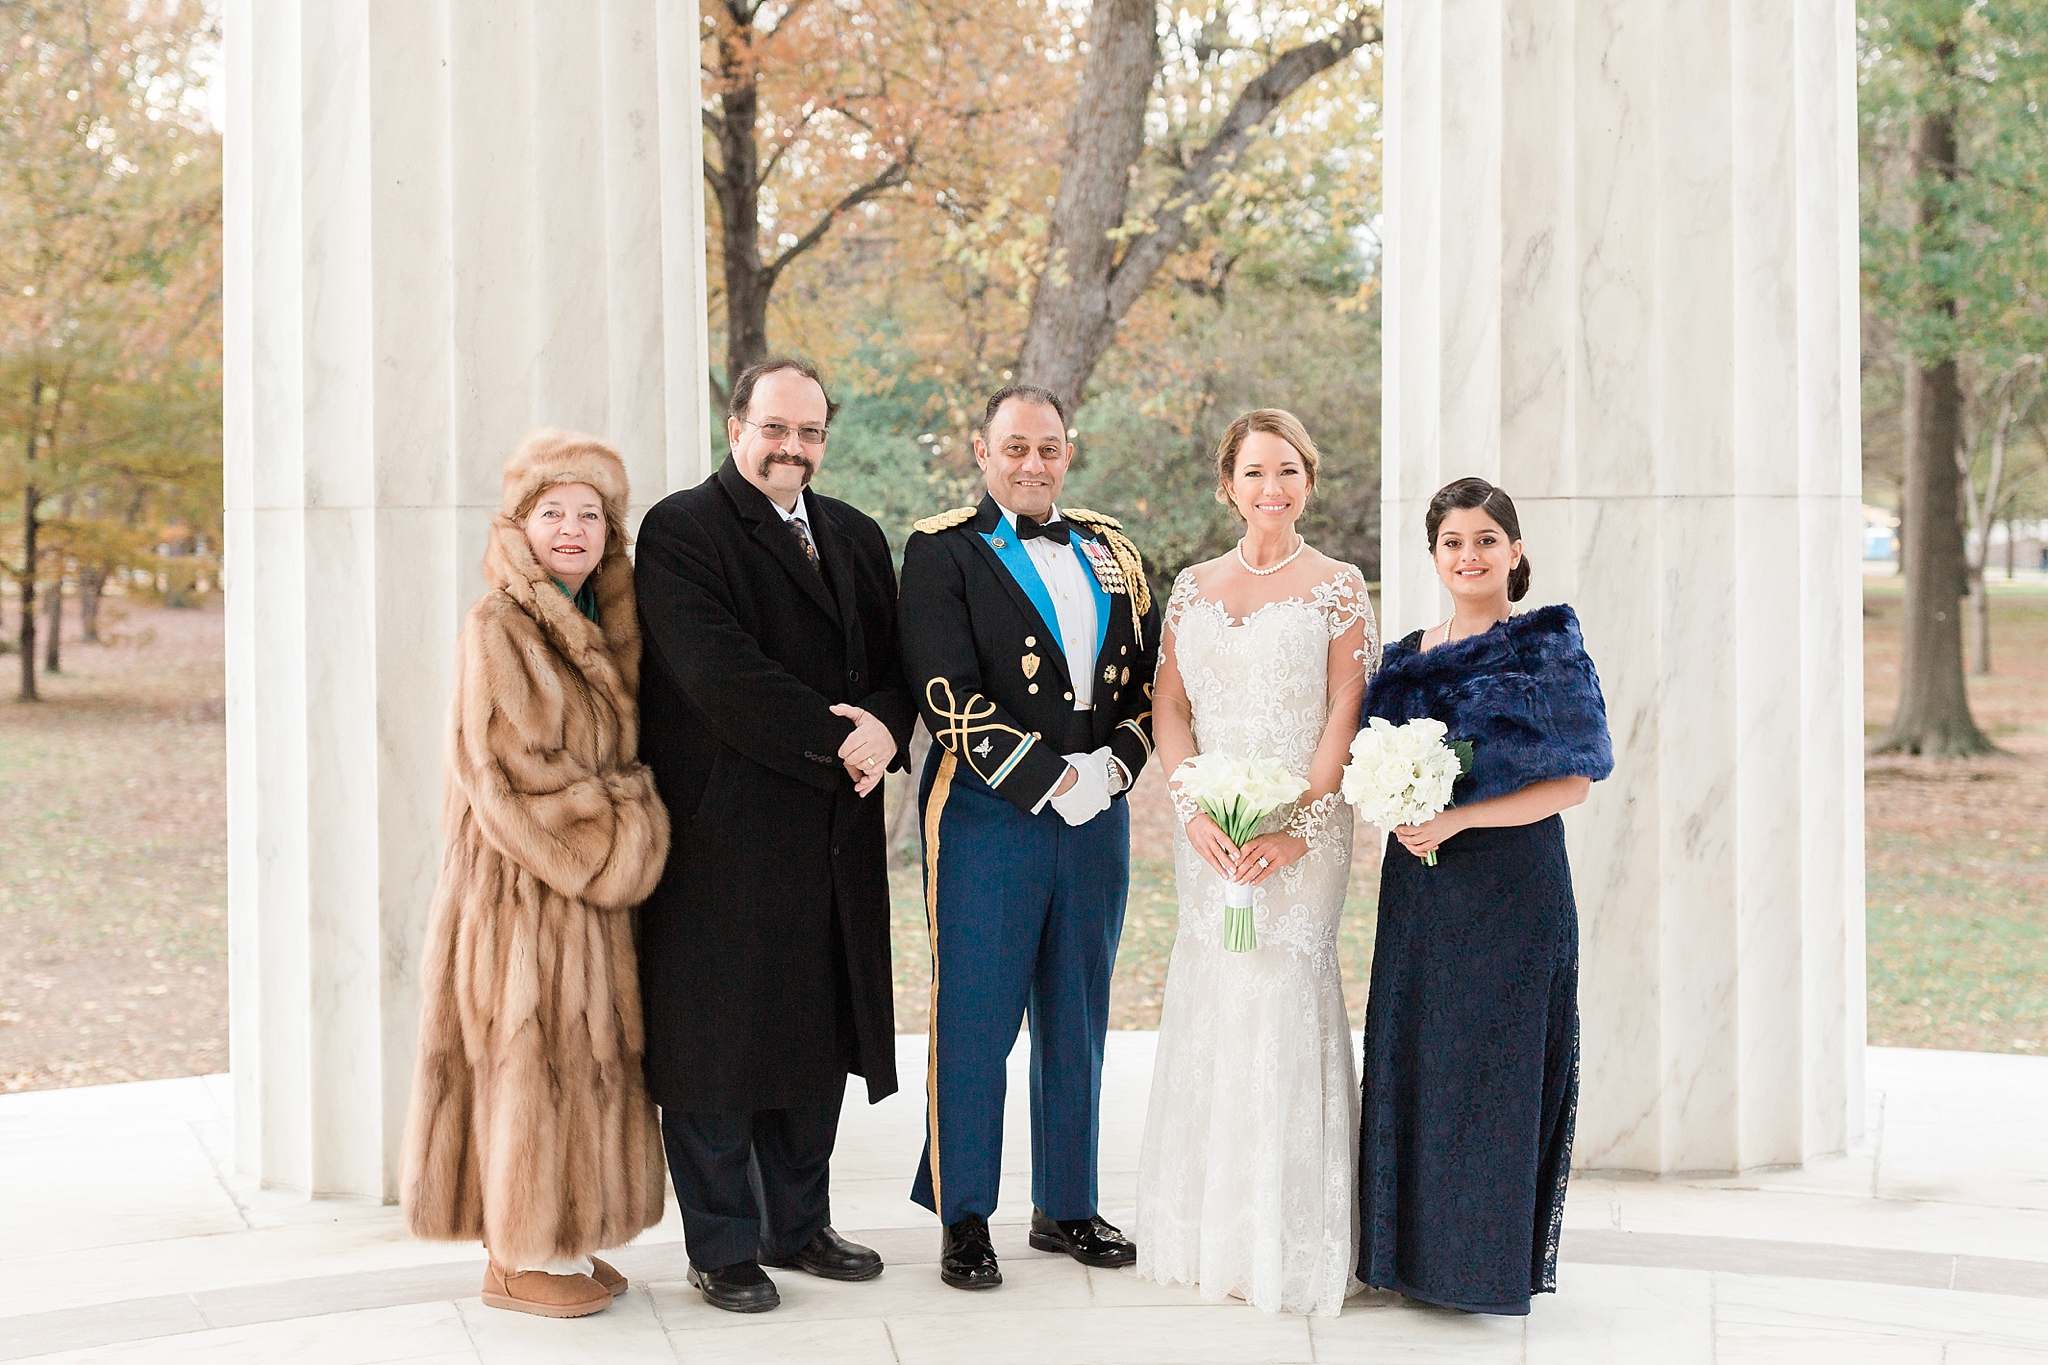 This intimate elopement was held at the DC War Memorial in District of Columbia and was photographed by Washington, DC wedding photographer, Alicia Lacey.